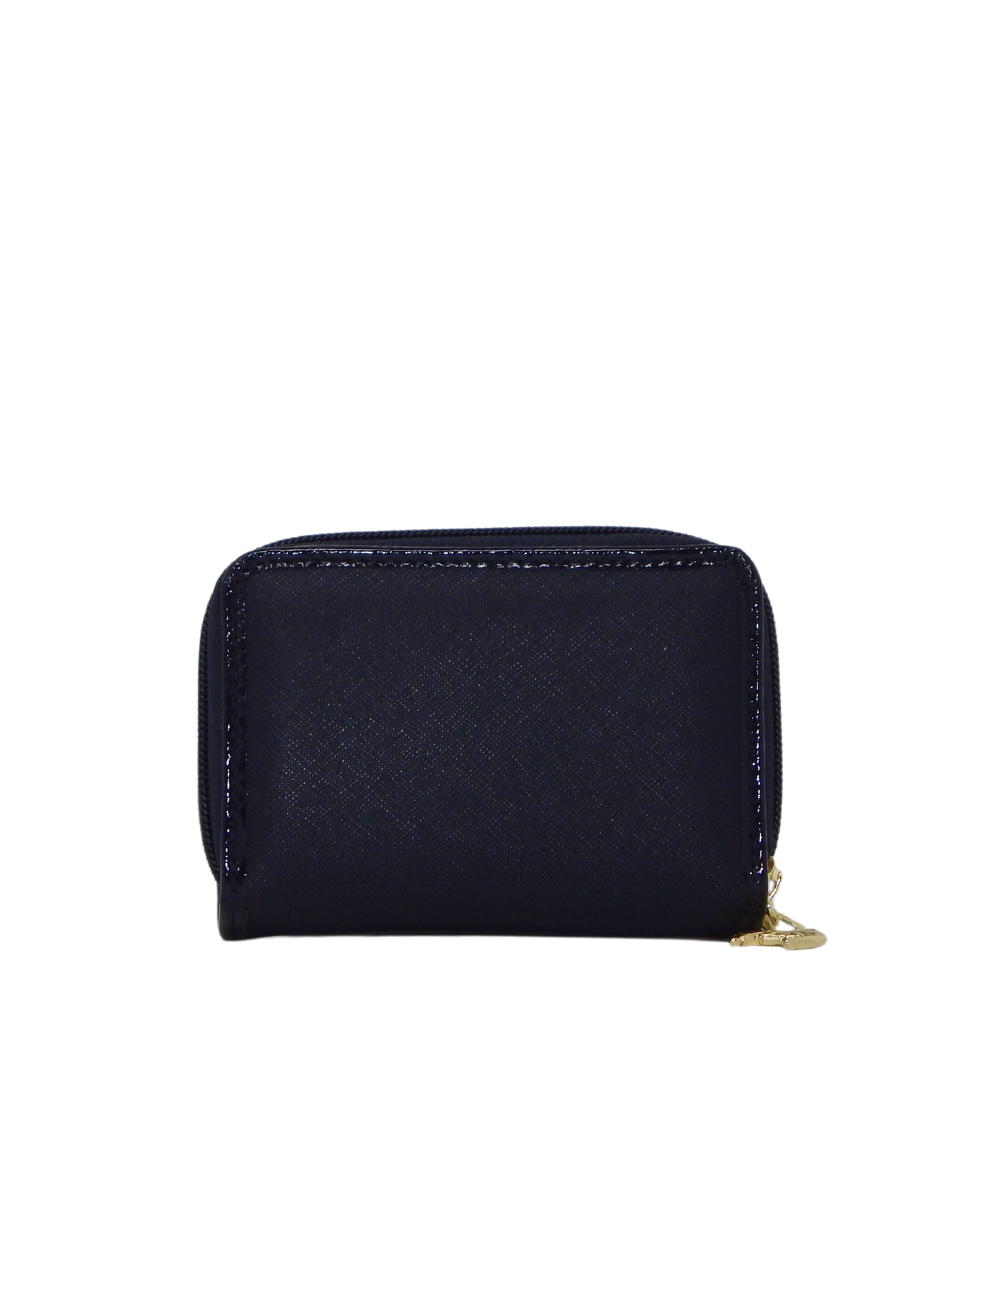 Gracce Card Holder Wallet